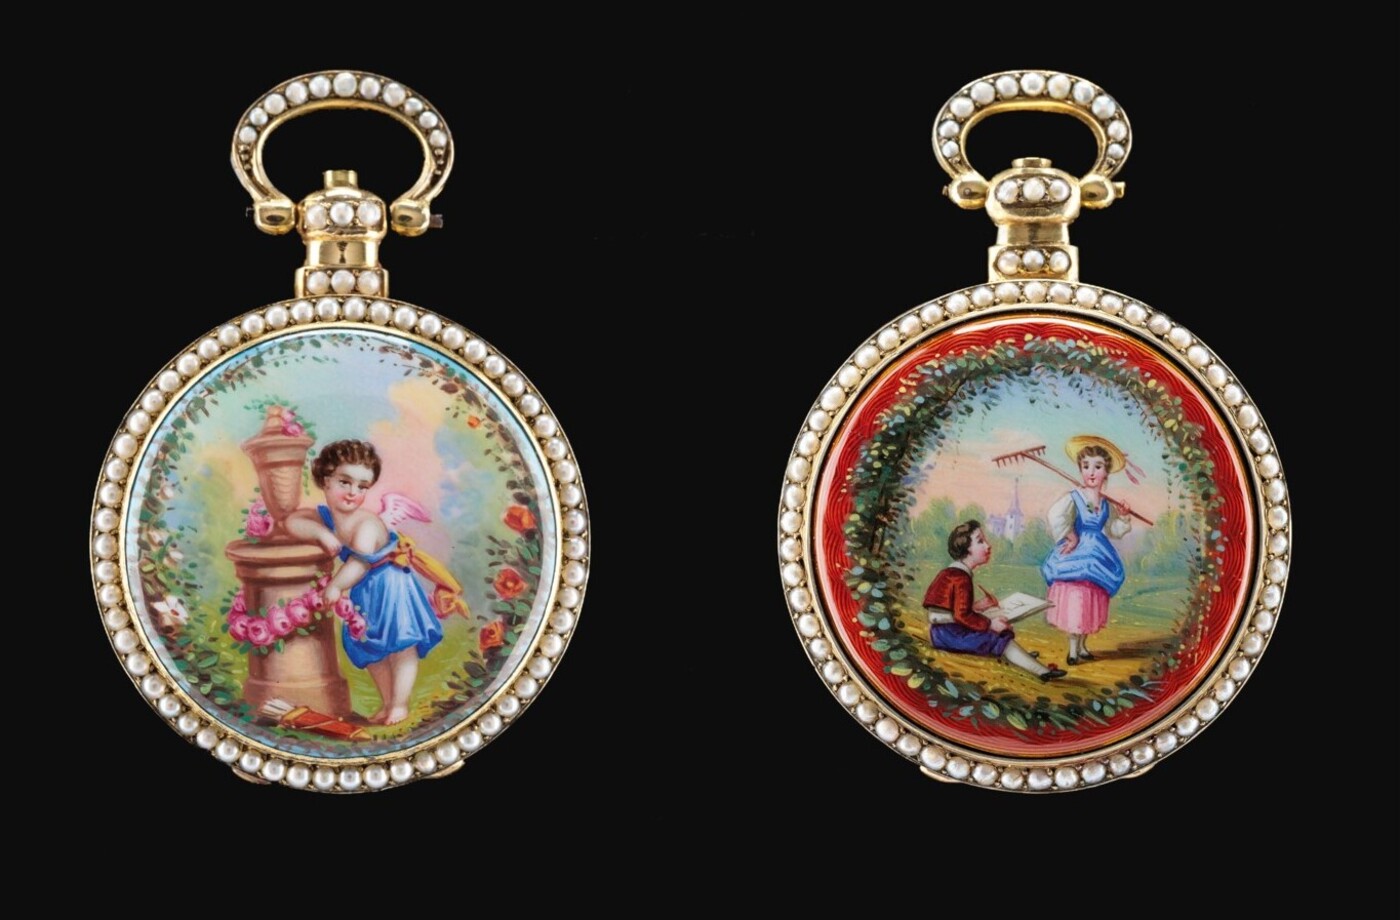 Pair of silver case Chinese market pendant watches, with "centre seconds" Mark of "Bovet Fleurier"